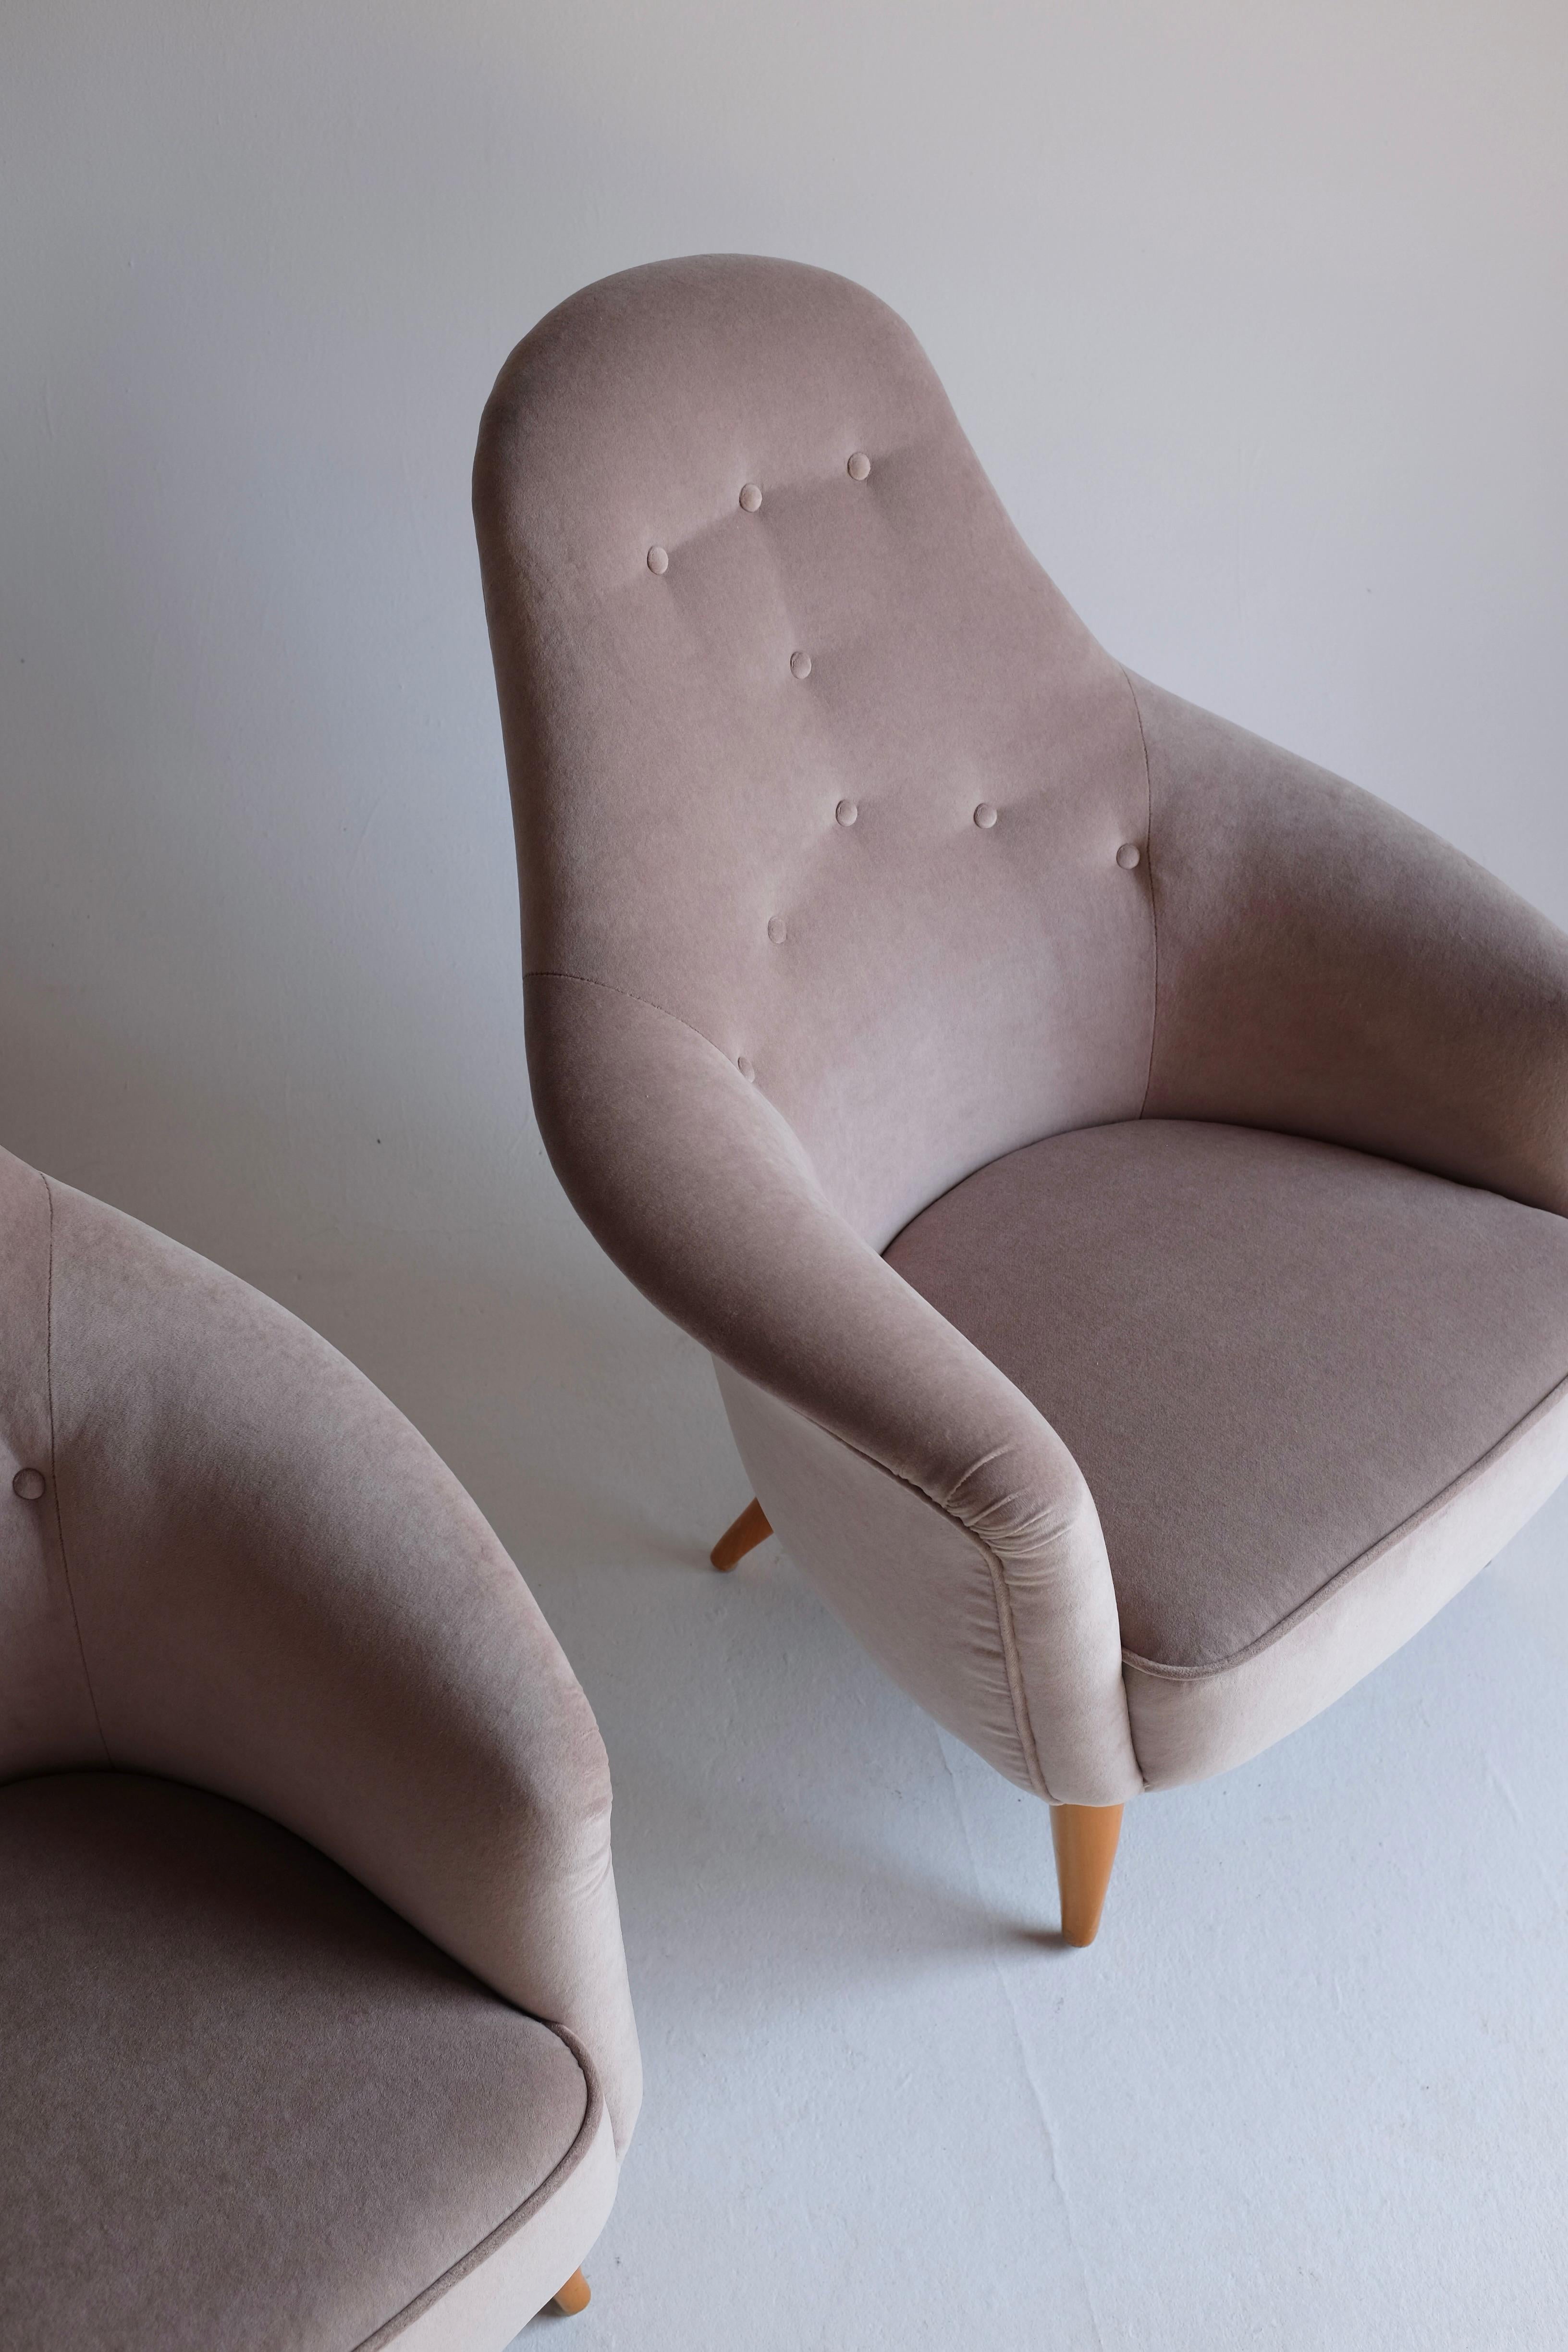 Pair of Adam Lounge Chairs by Kerstin Hörlin-Holmquist, created in the mid 1950's for Nordiska Kompaniet and part of the Paradiset collection. This Swedish mid-century icon bears her signature look of a light and gracious design. Newly upholstered